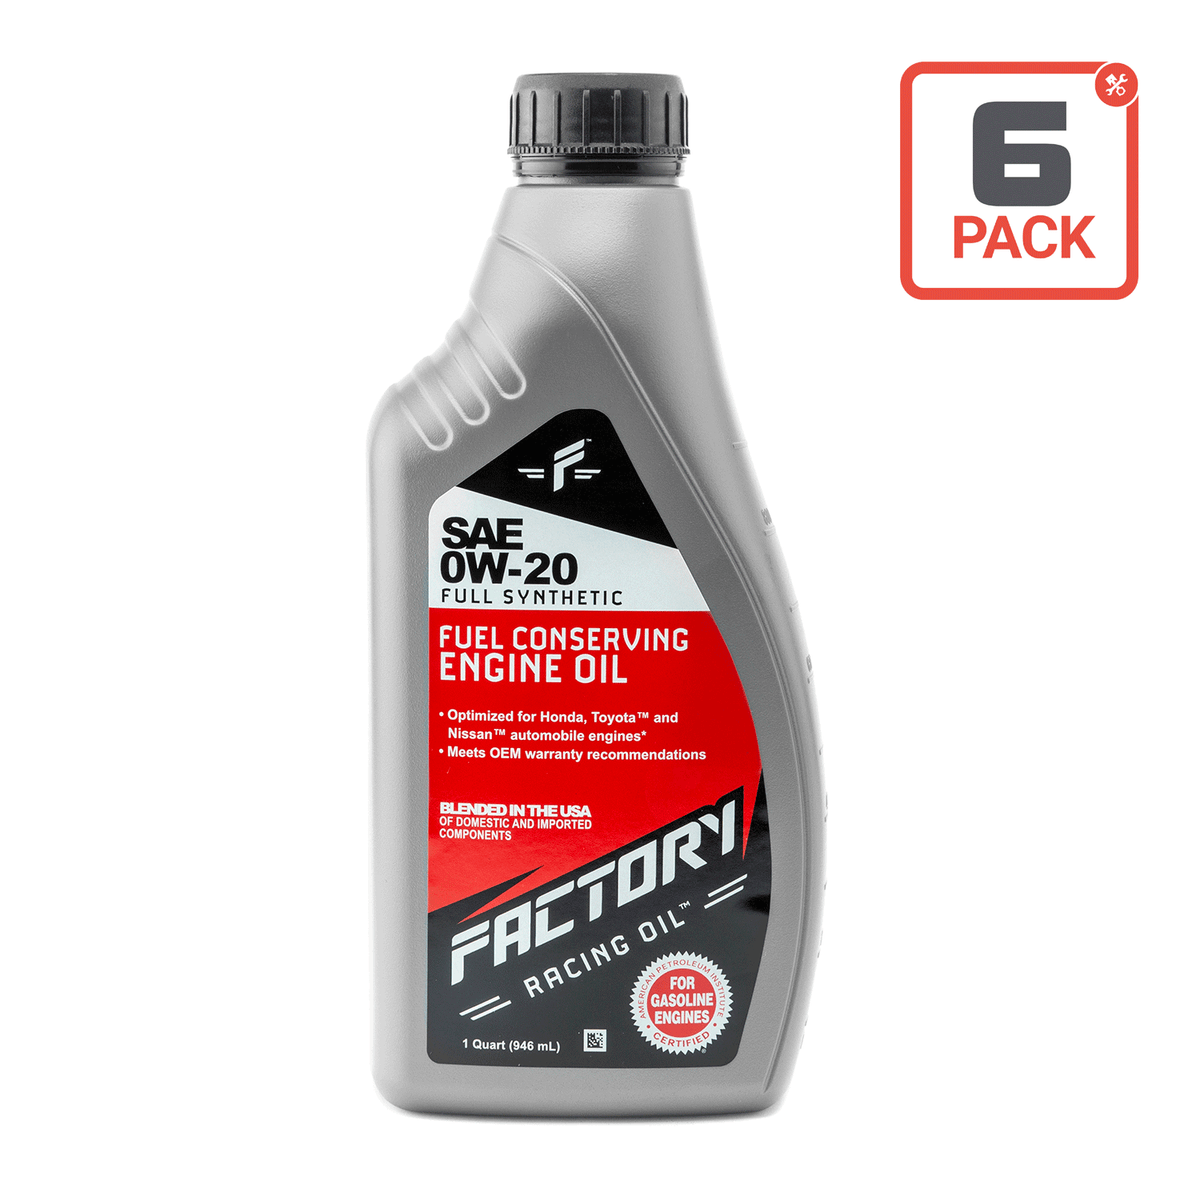 Factory Racing Oil Full Synthetic SAE 0W-20 Fuel Conserving Engine Oil